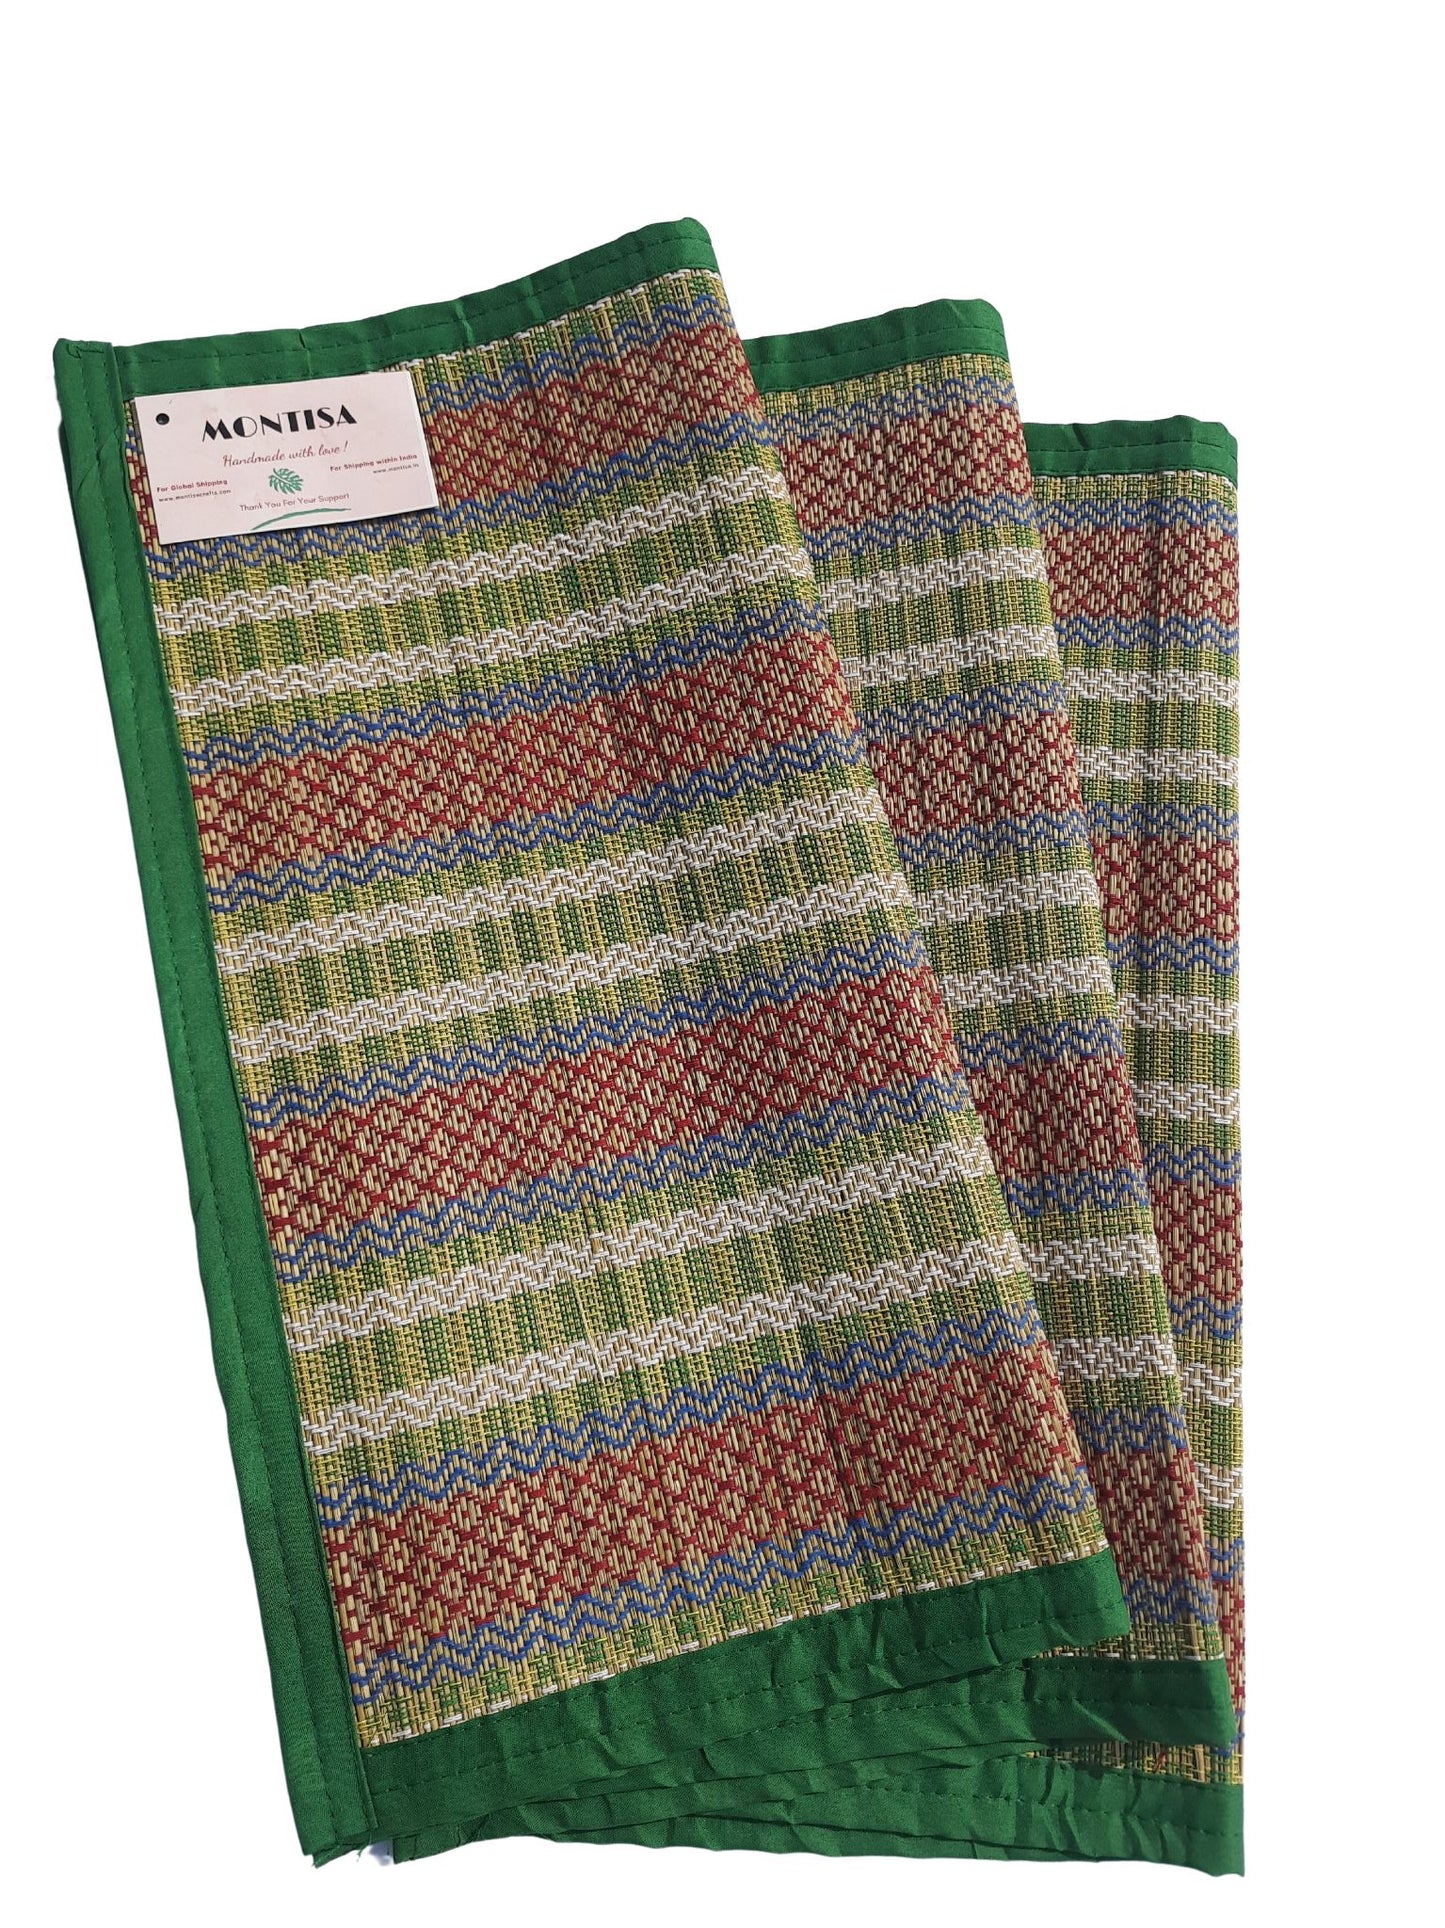 Puja mats for sitting natural green grass mat for prayer handwoven asan green,18x18 inches square shape holy alternative to cotton  puja aasan T3-39